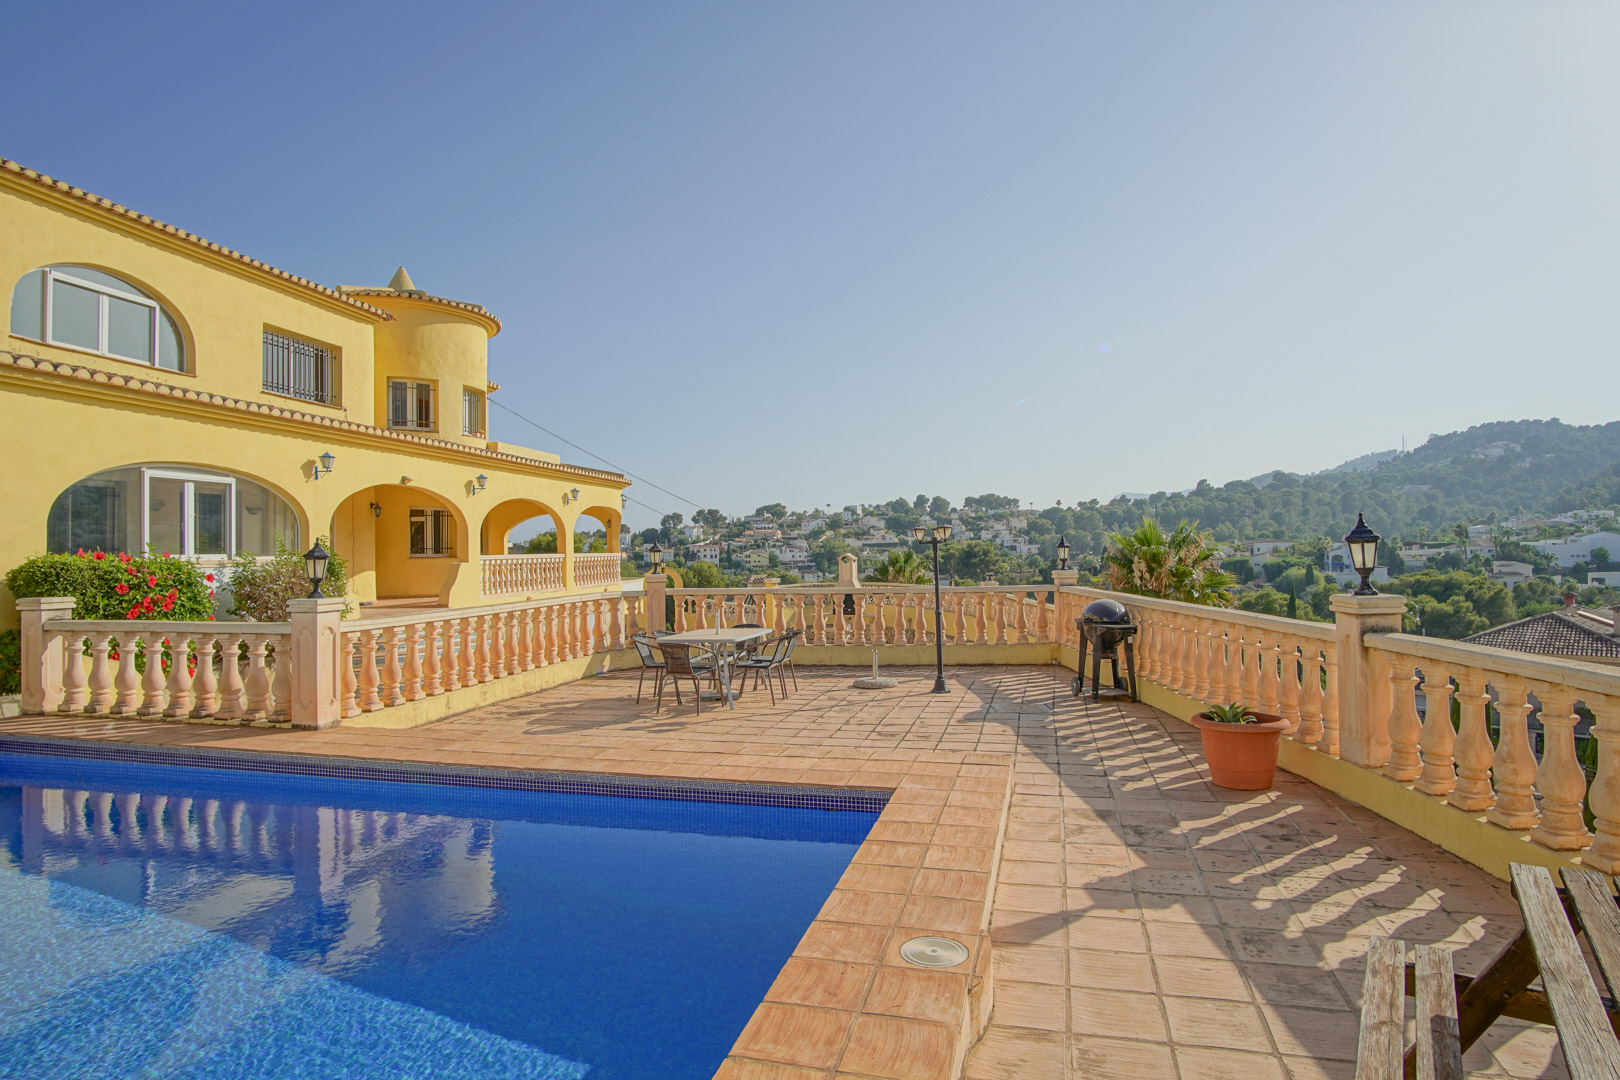 Villa with 4 apartments for sale in Benissa Costa, ideal if you want to generate